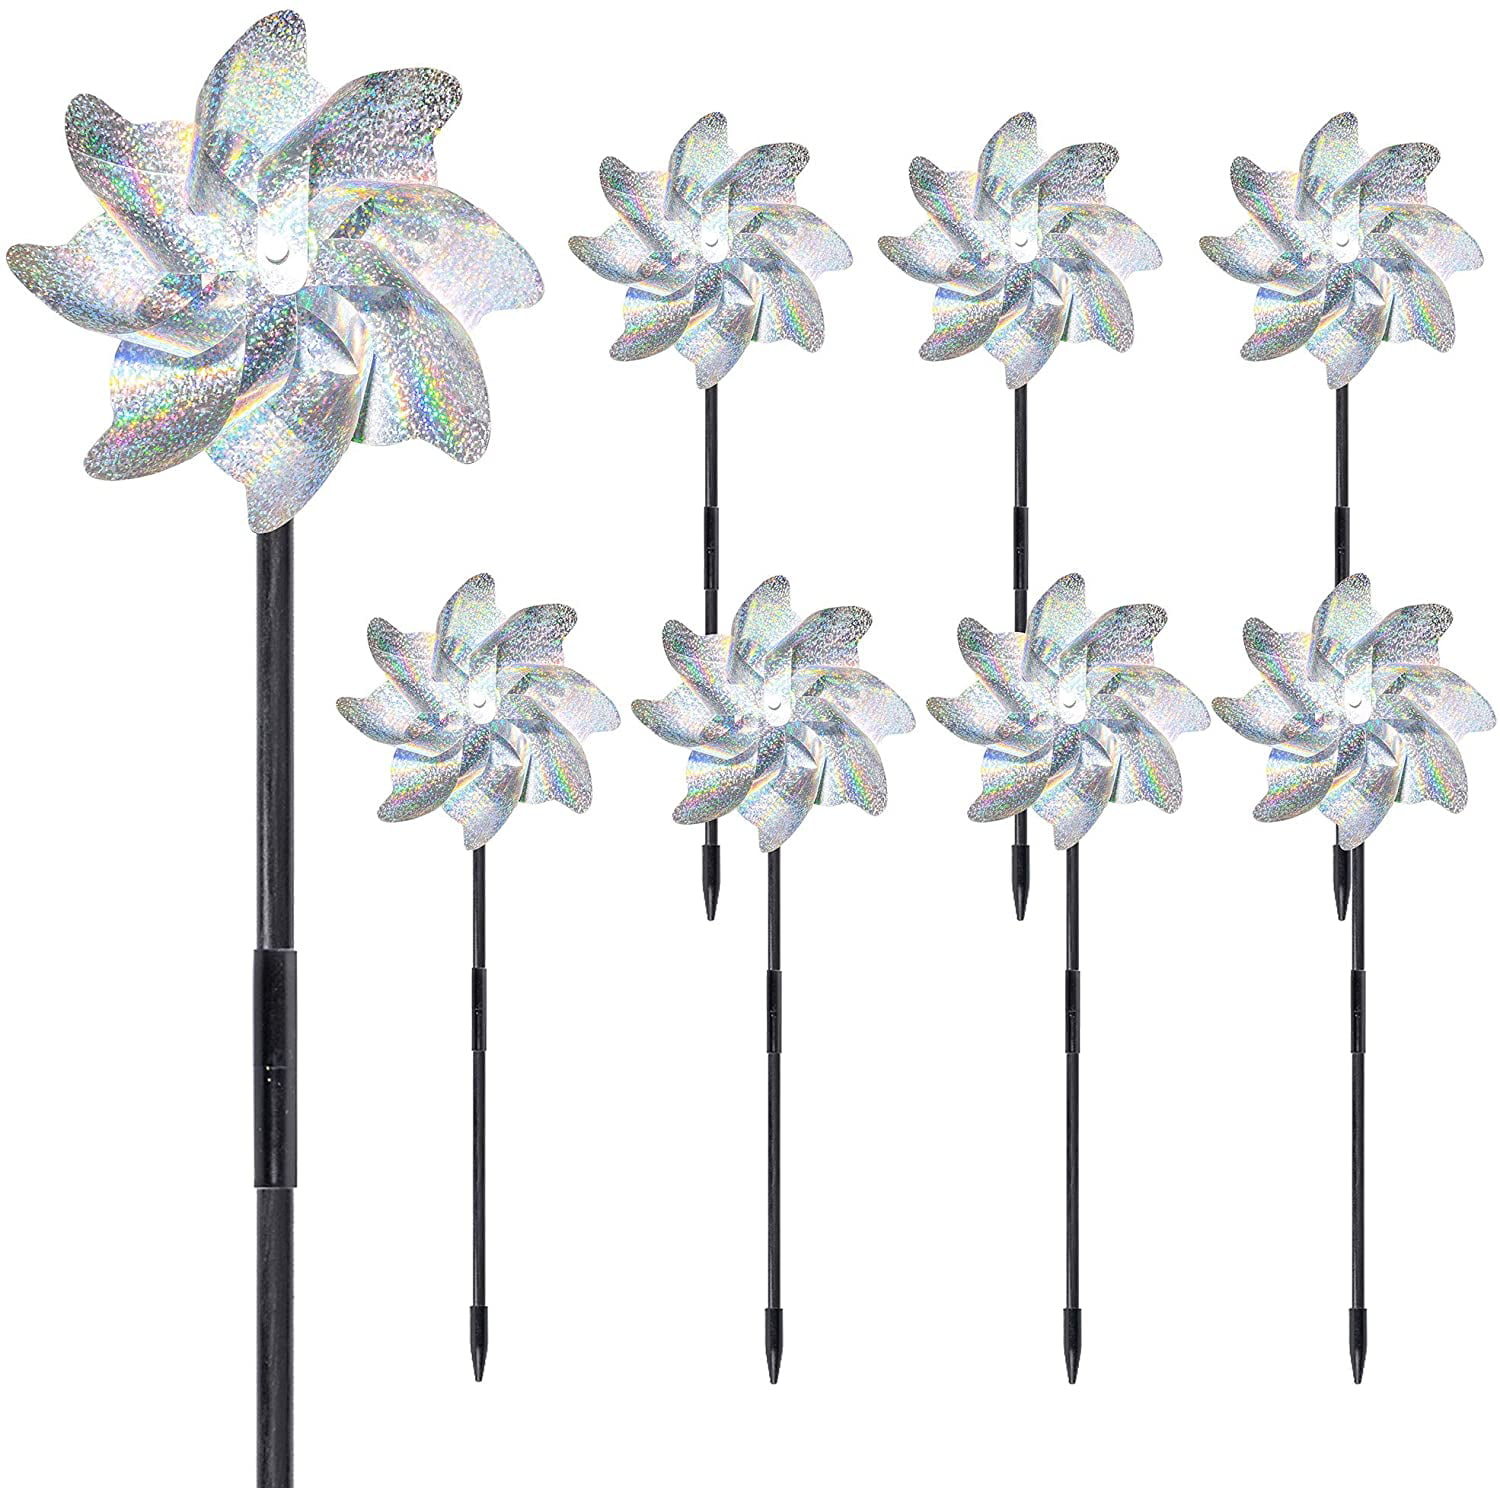 Reflective Pinwheels With Stakes,Sparkly Holographic Pin Wheel Spinners For Garden Decor,Effectively Keep Birds Away Rubeyul Wind Spinner Bird Blinder Repellent PinWheels 1/5 /10 PCS